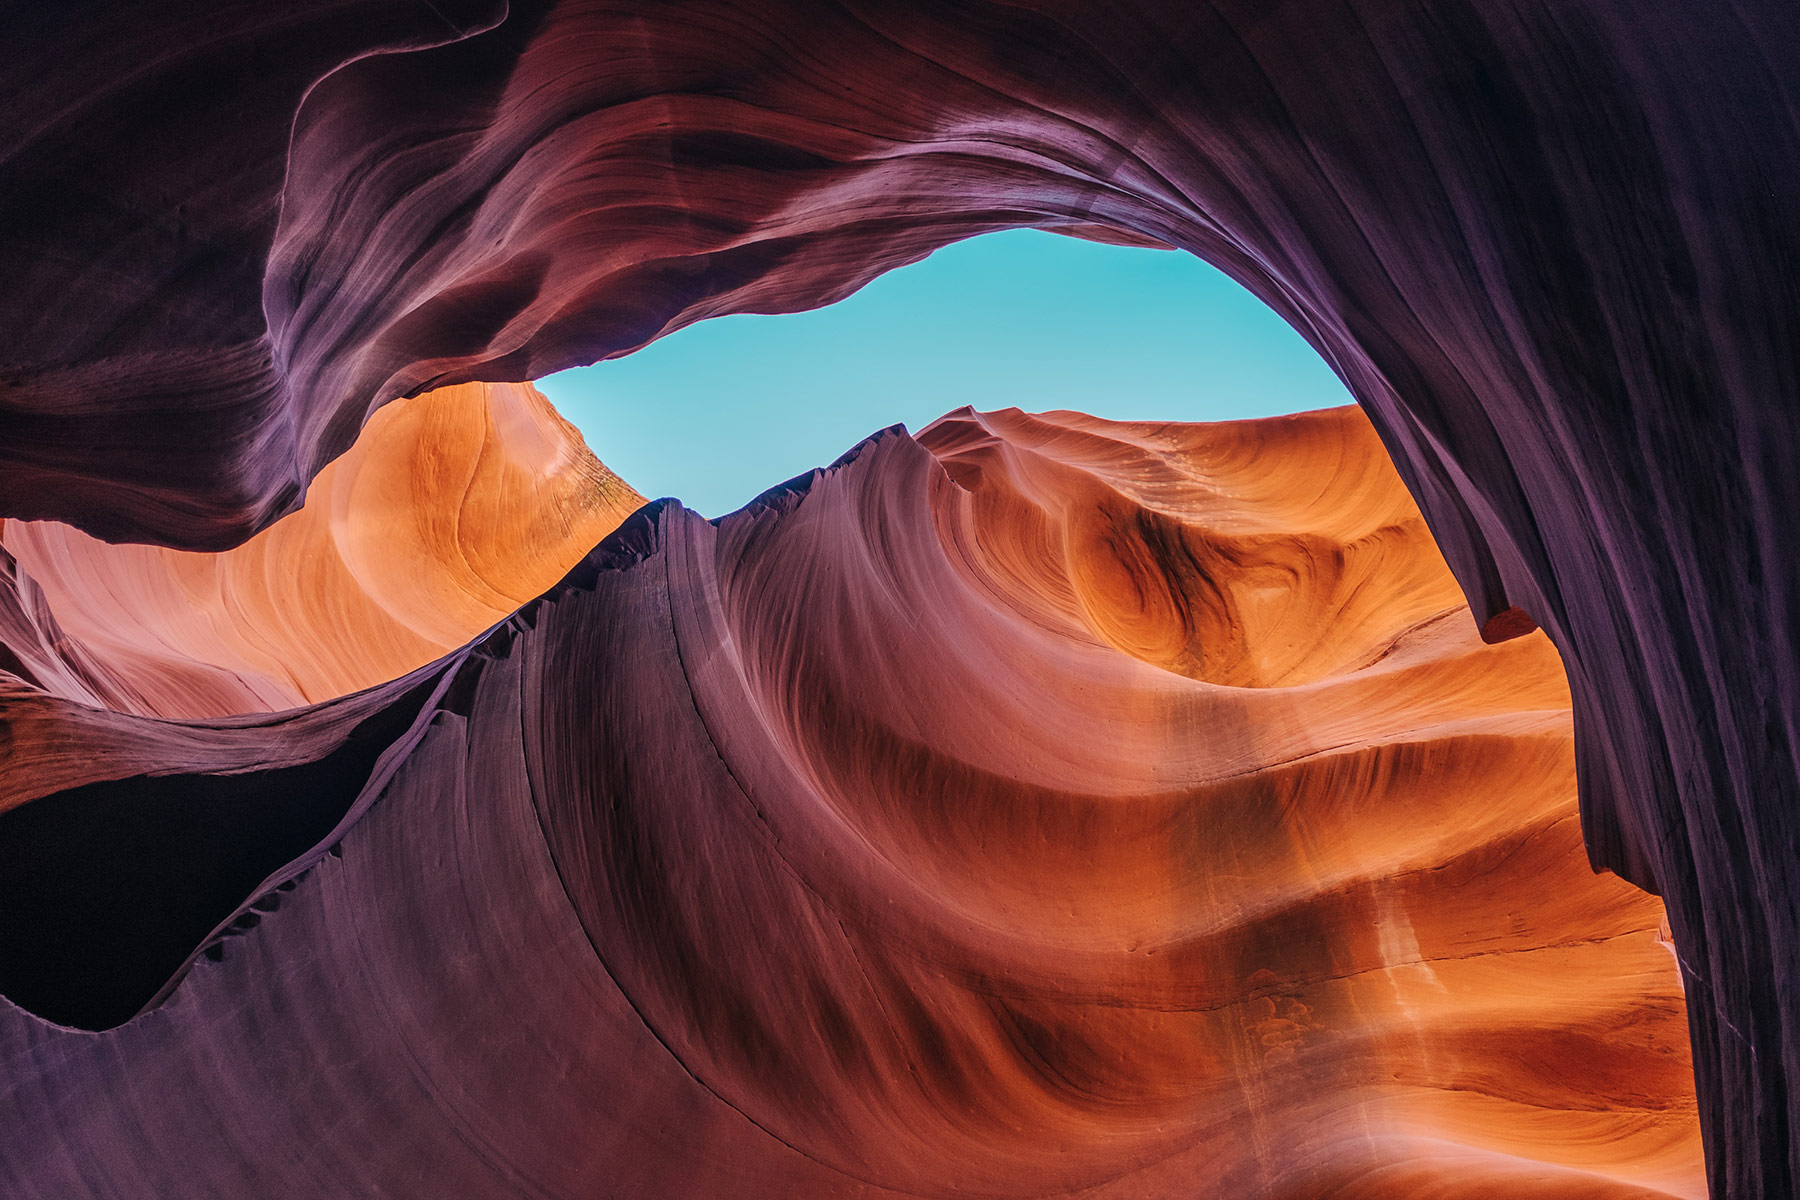 The most beautiful canyons you’ll ever see